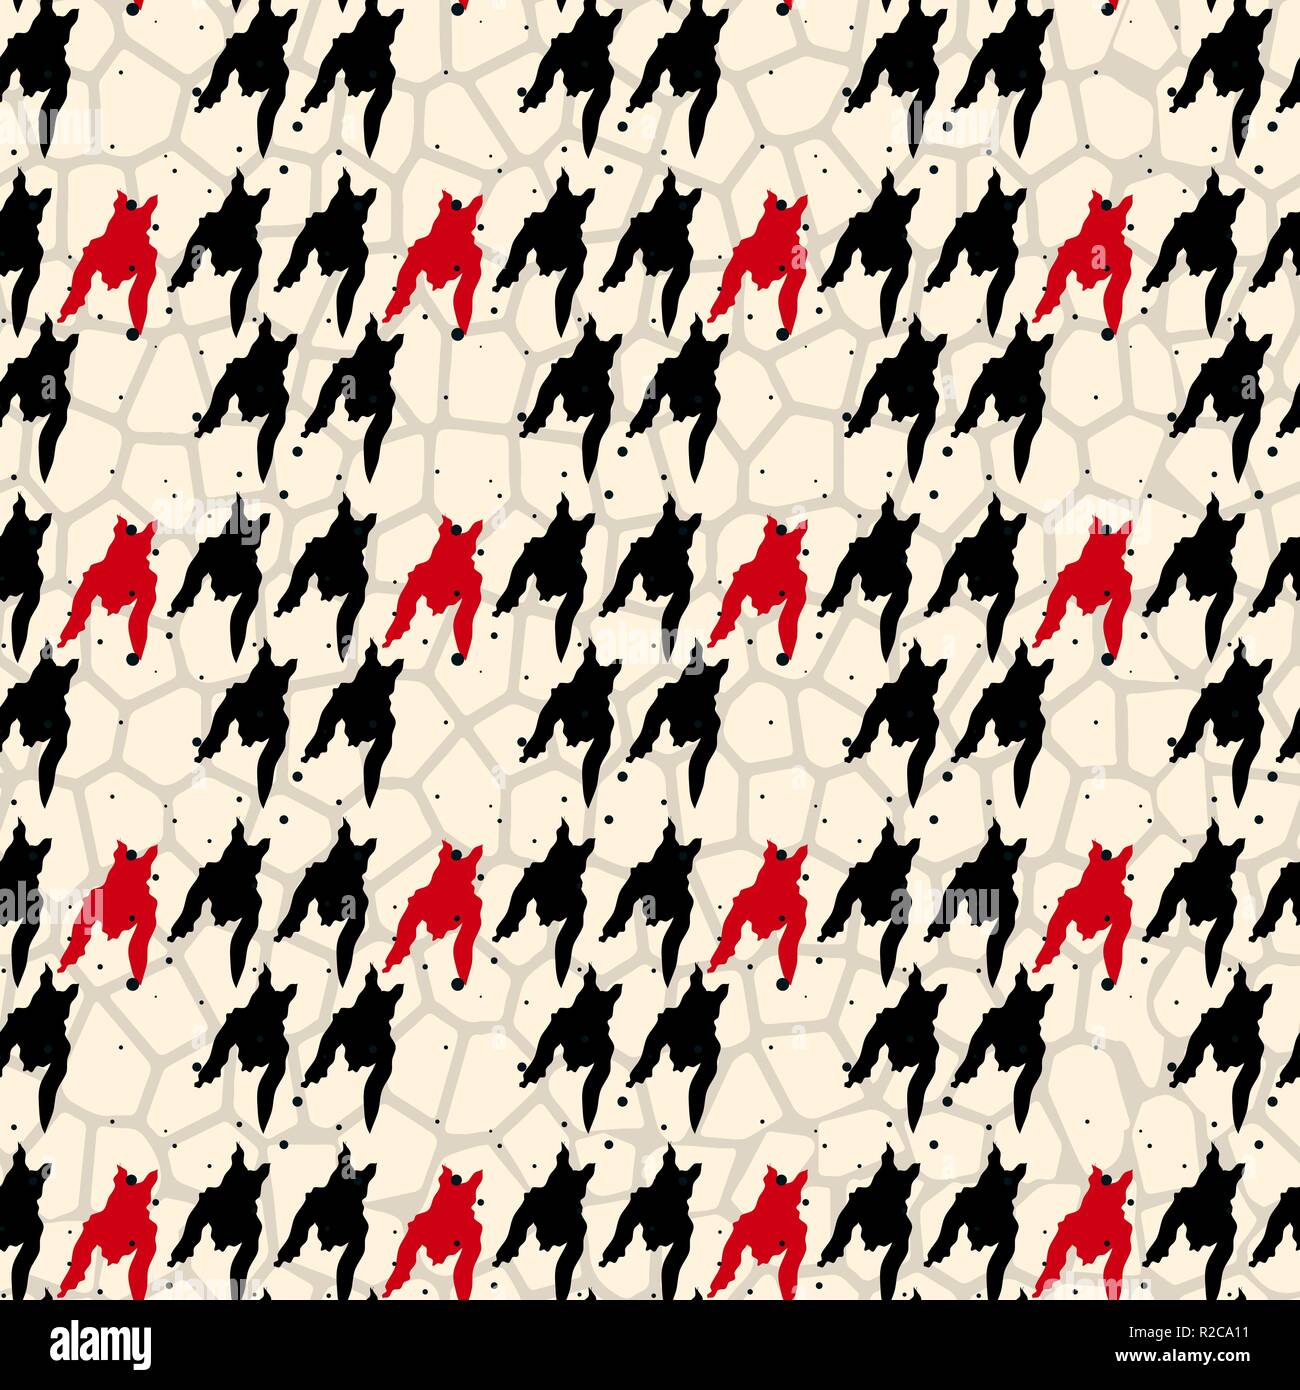 Seamless houndstooth pattern in red and black. Vector image. eps